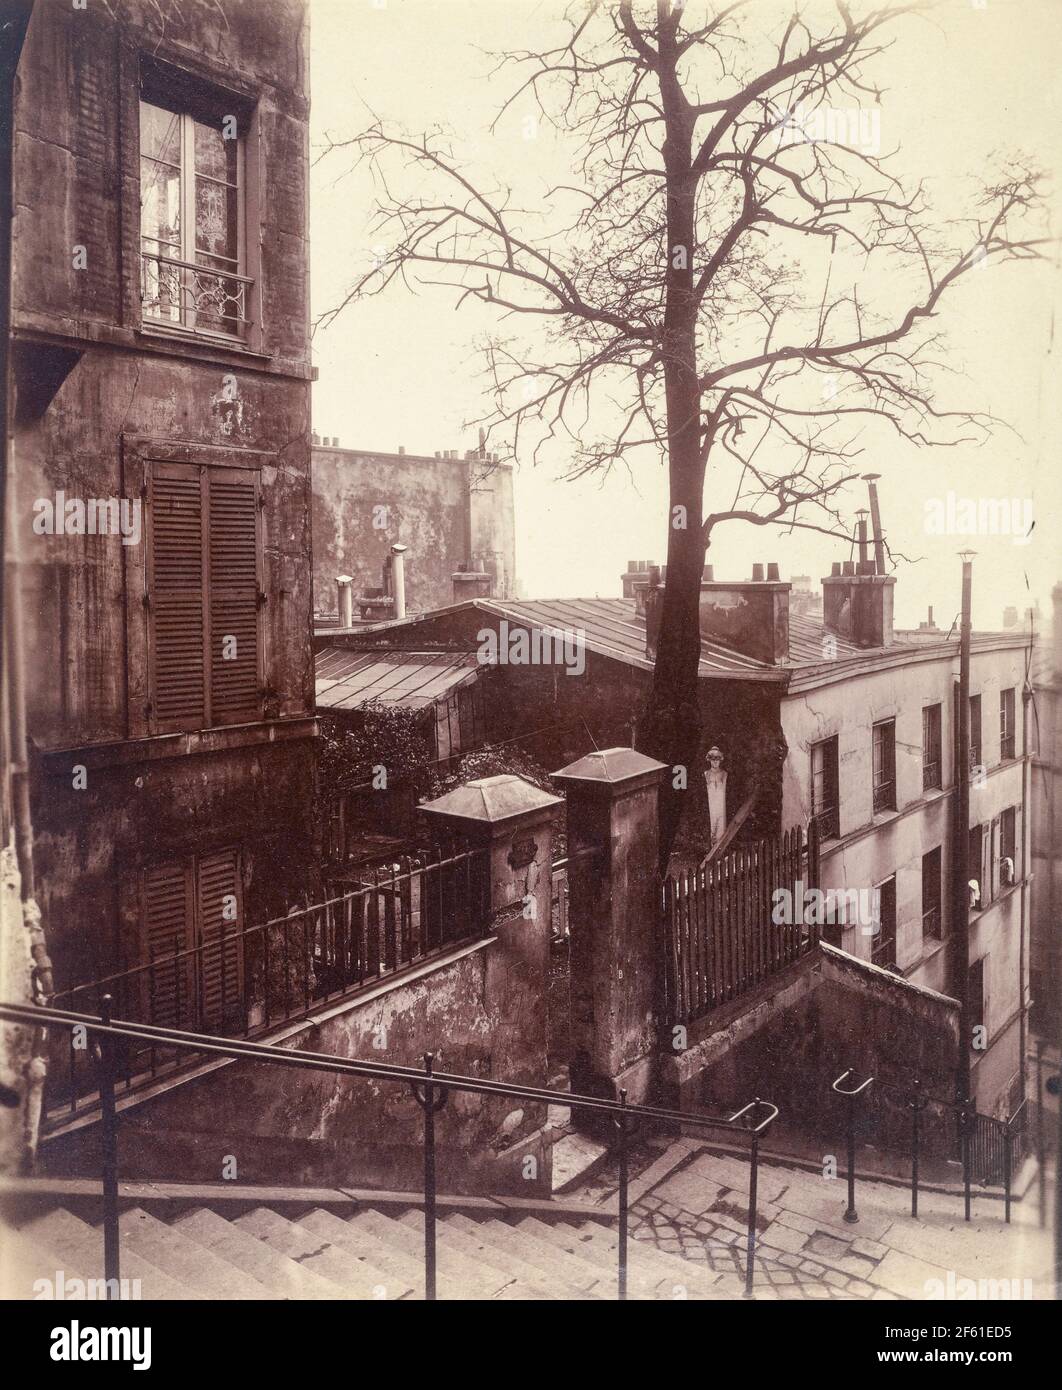 Staircase, Montmartre, Paris, France circa 1921 by Eugene Atget.  Eugène Atget, full name Jean-Eugène-Auguste Atget, 1857 - 1927.  French photographer, famed for his decades long work to document the architecture and aura of Paris before all was lost to modernisation. Stock Photo